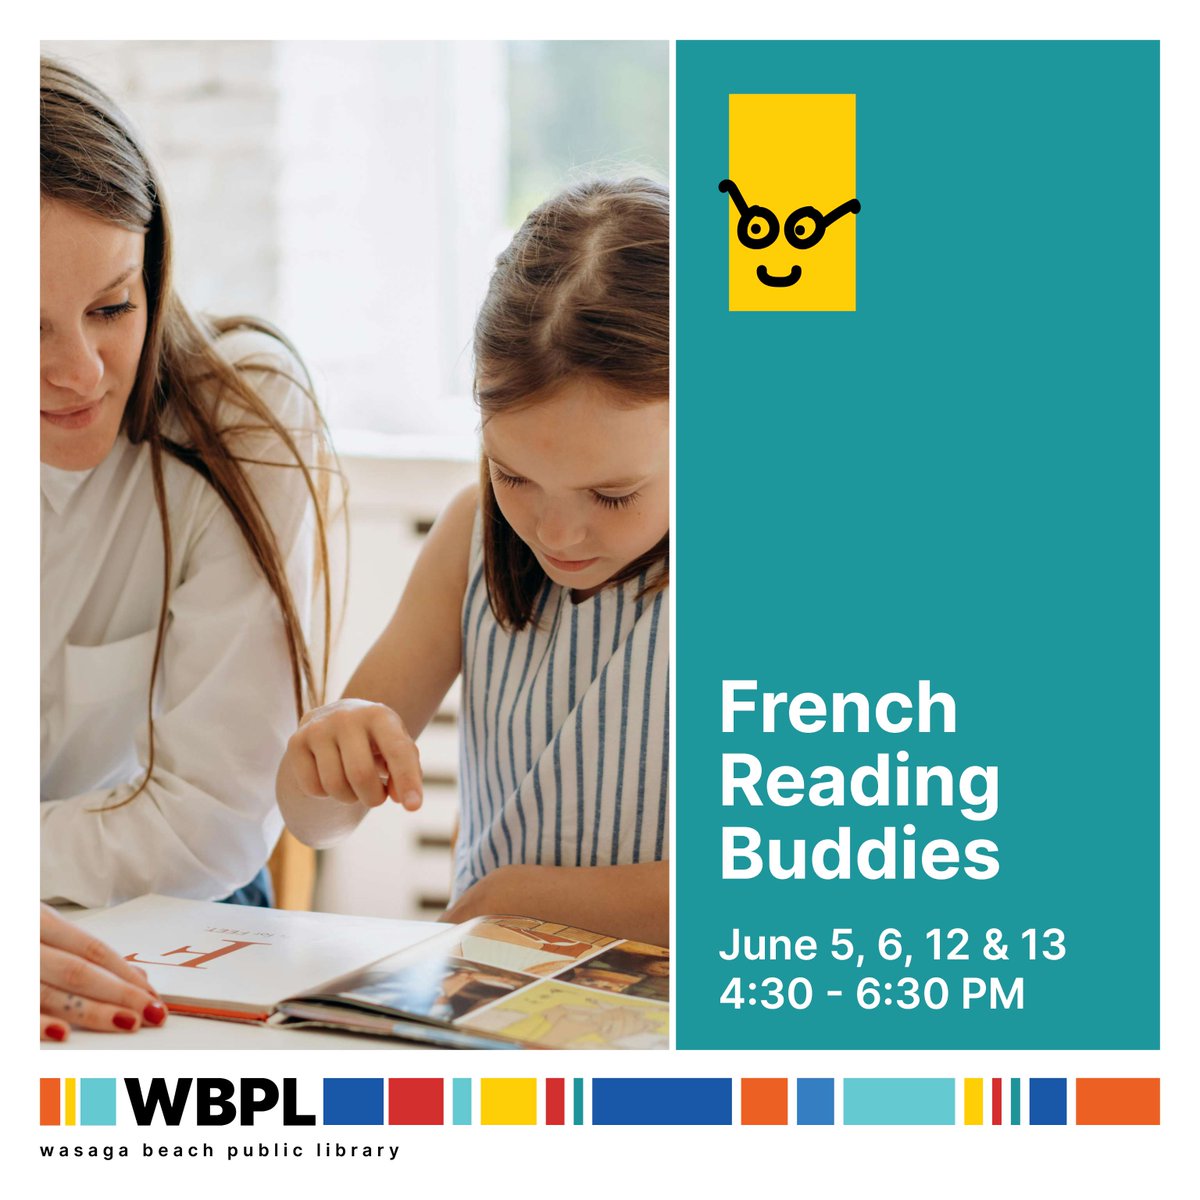 Join our new French Reading Buddies program, perfect for French Immersion students aged 6-9! 📚 Led by a dedicated volunteer, each child gets one-on-one support in a fun, encouraging environment. #FrenchReading #FindItHere #WasagaBeach ow.ly/hHxy50RWY8G